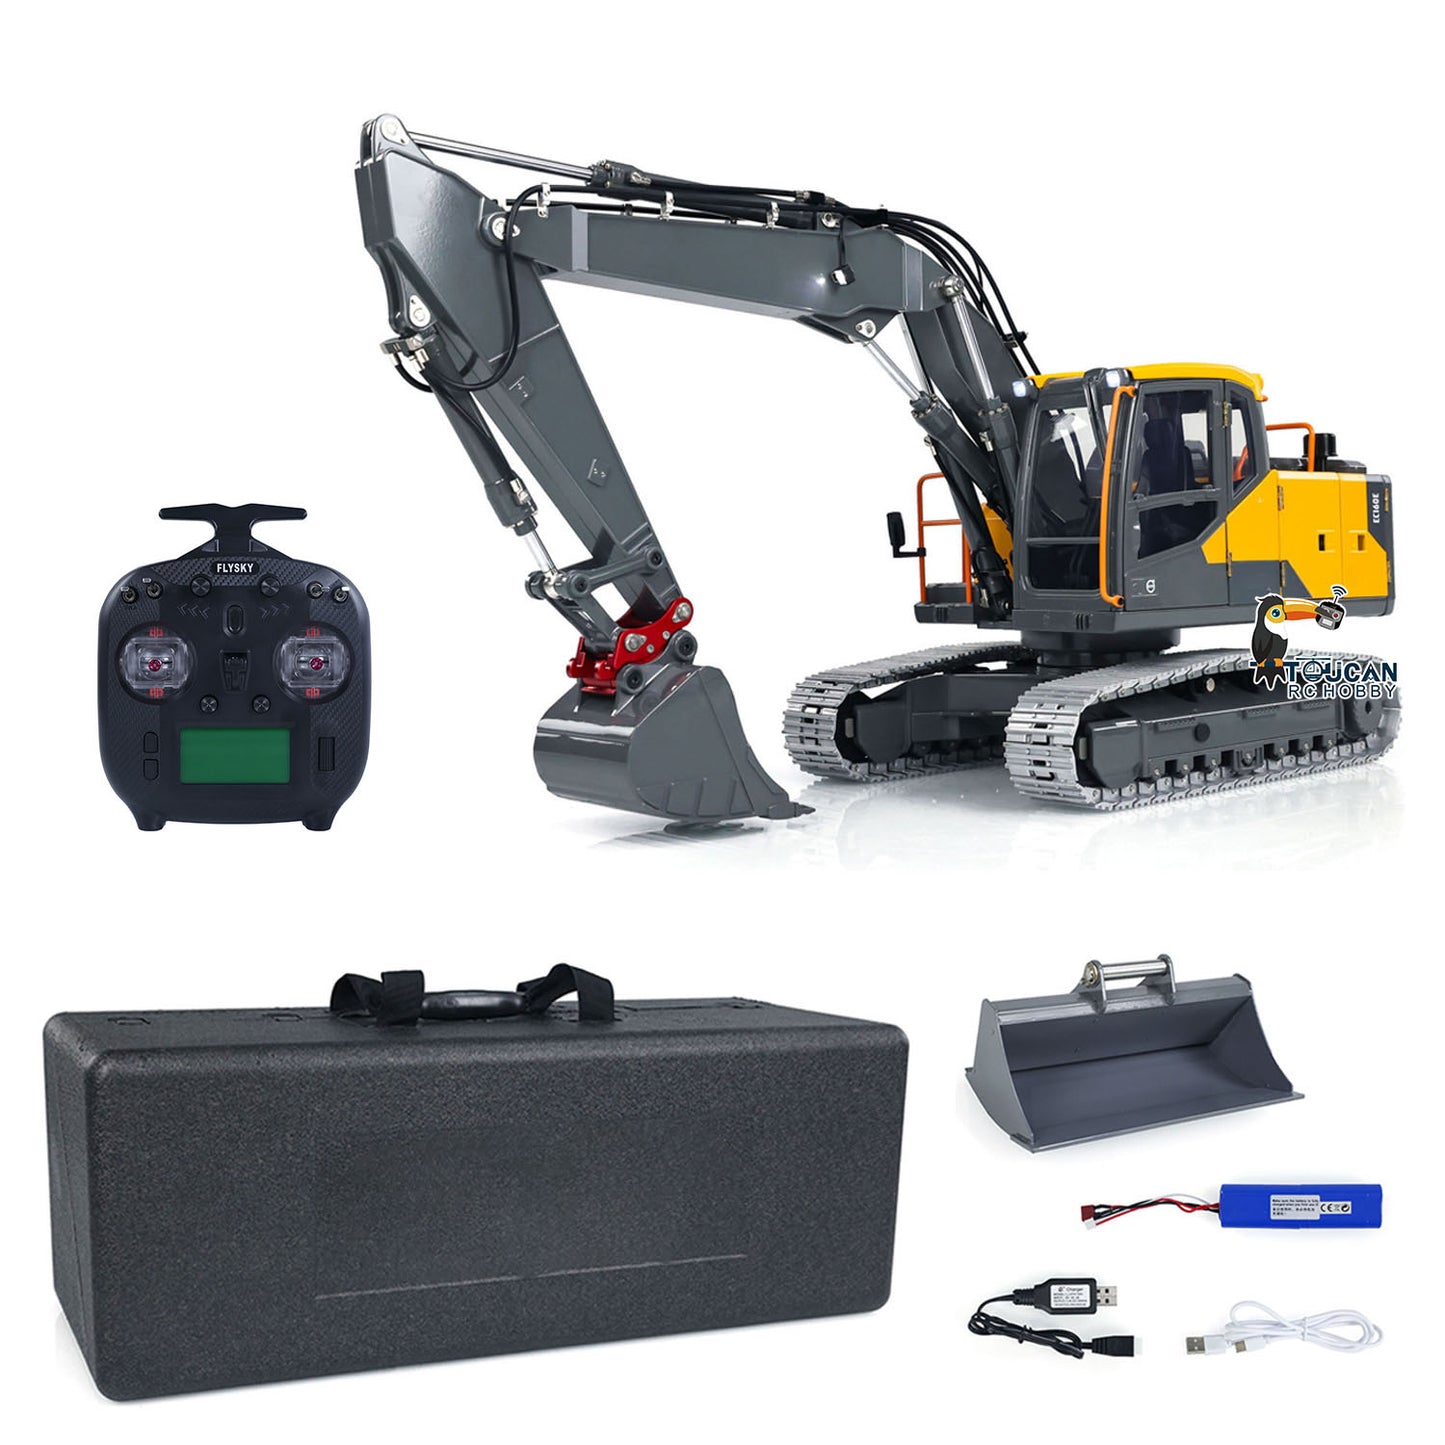 EC160E 1:14 Hydraulic 3 Arms RC Excavator Remote Control Diggers Stander Version Painted and Assembled CNC 3 Arms Upgraded Set